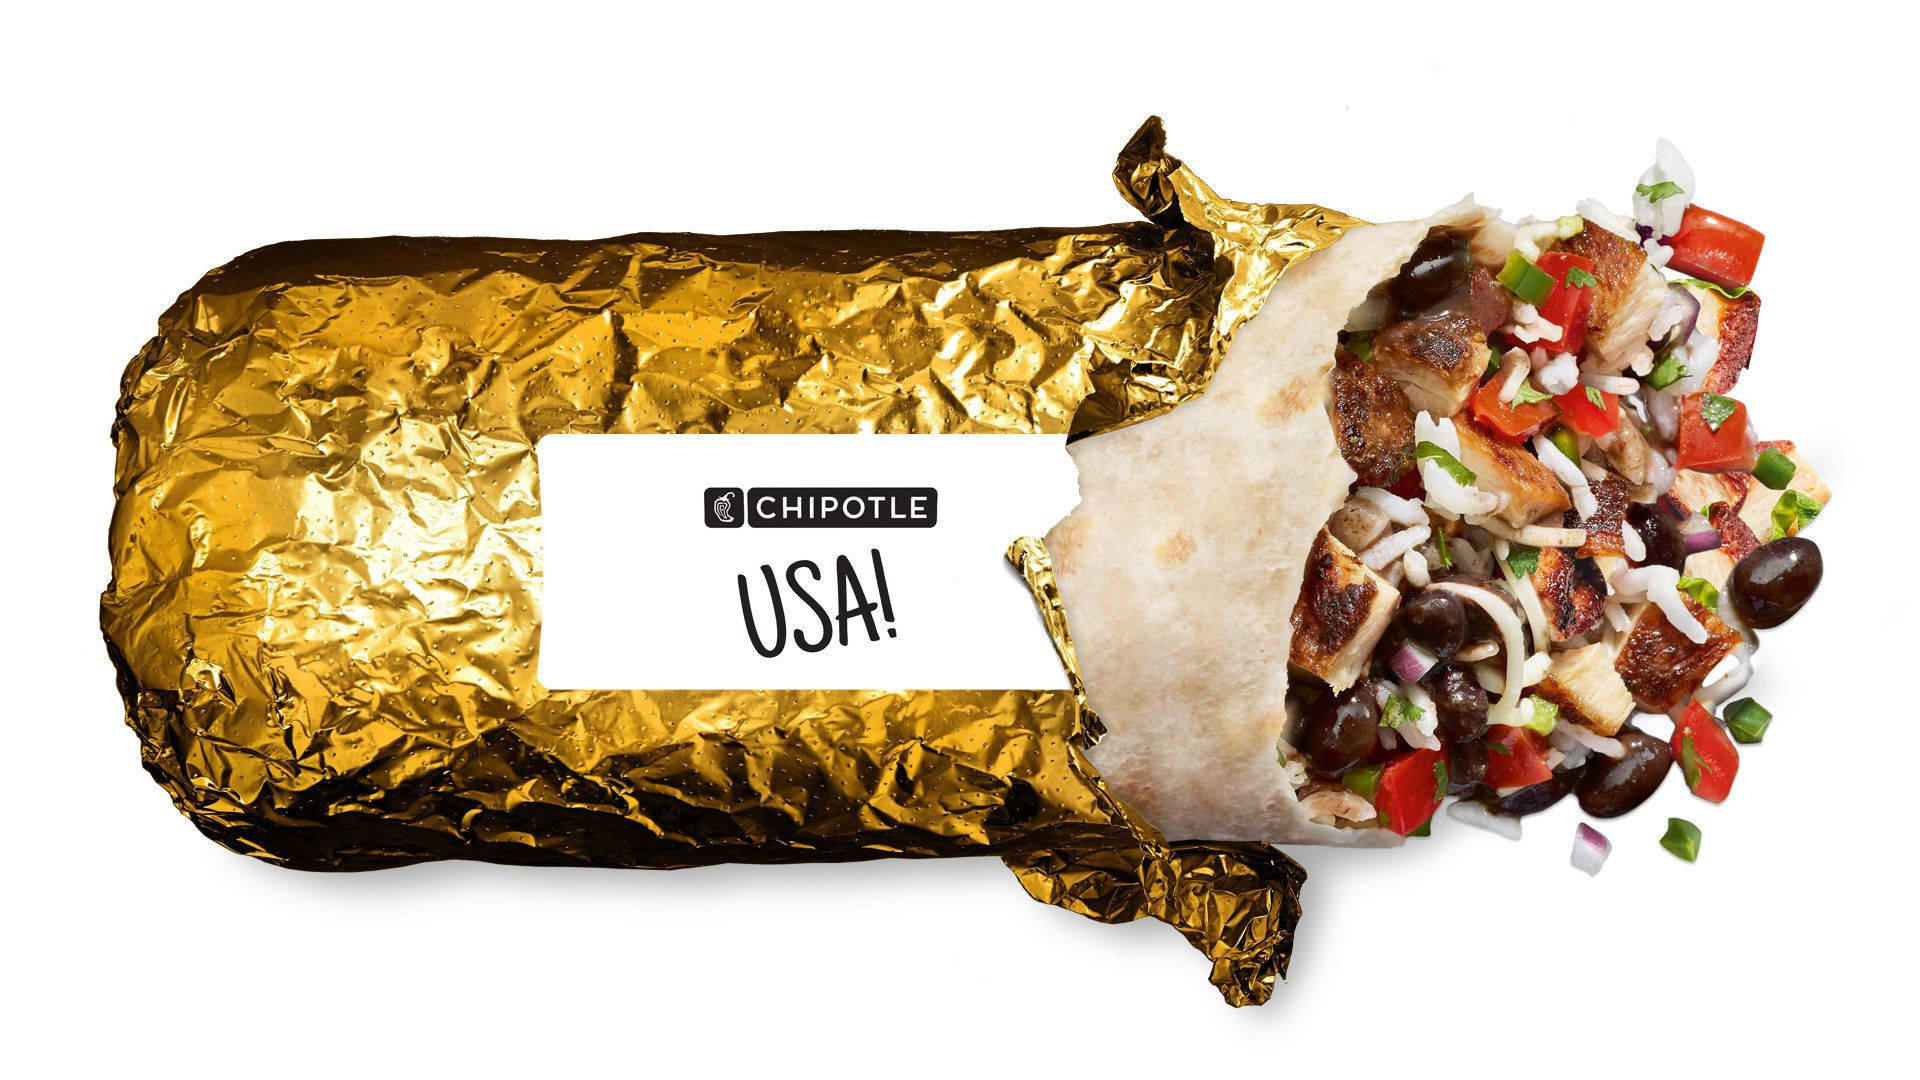 Caption: Gold Foil Wrapped Burrito Shimmering With Quality